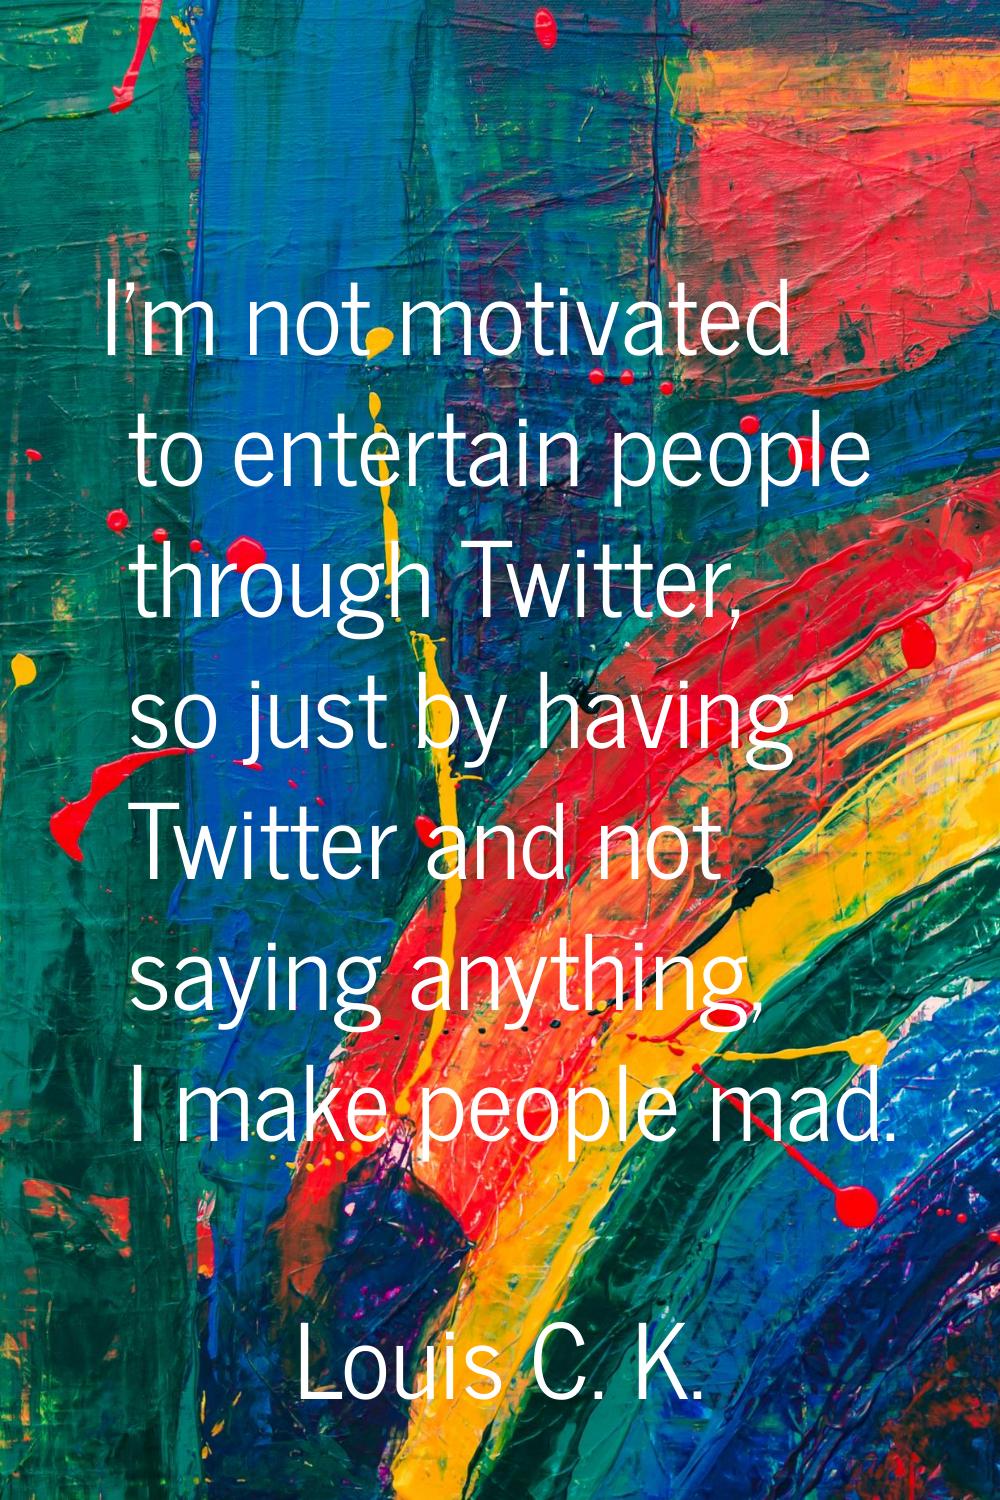 I'm not motivated to entertain people through Twitter, so just by having Twitter and not saying any